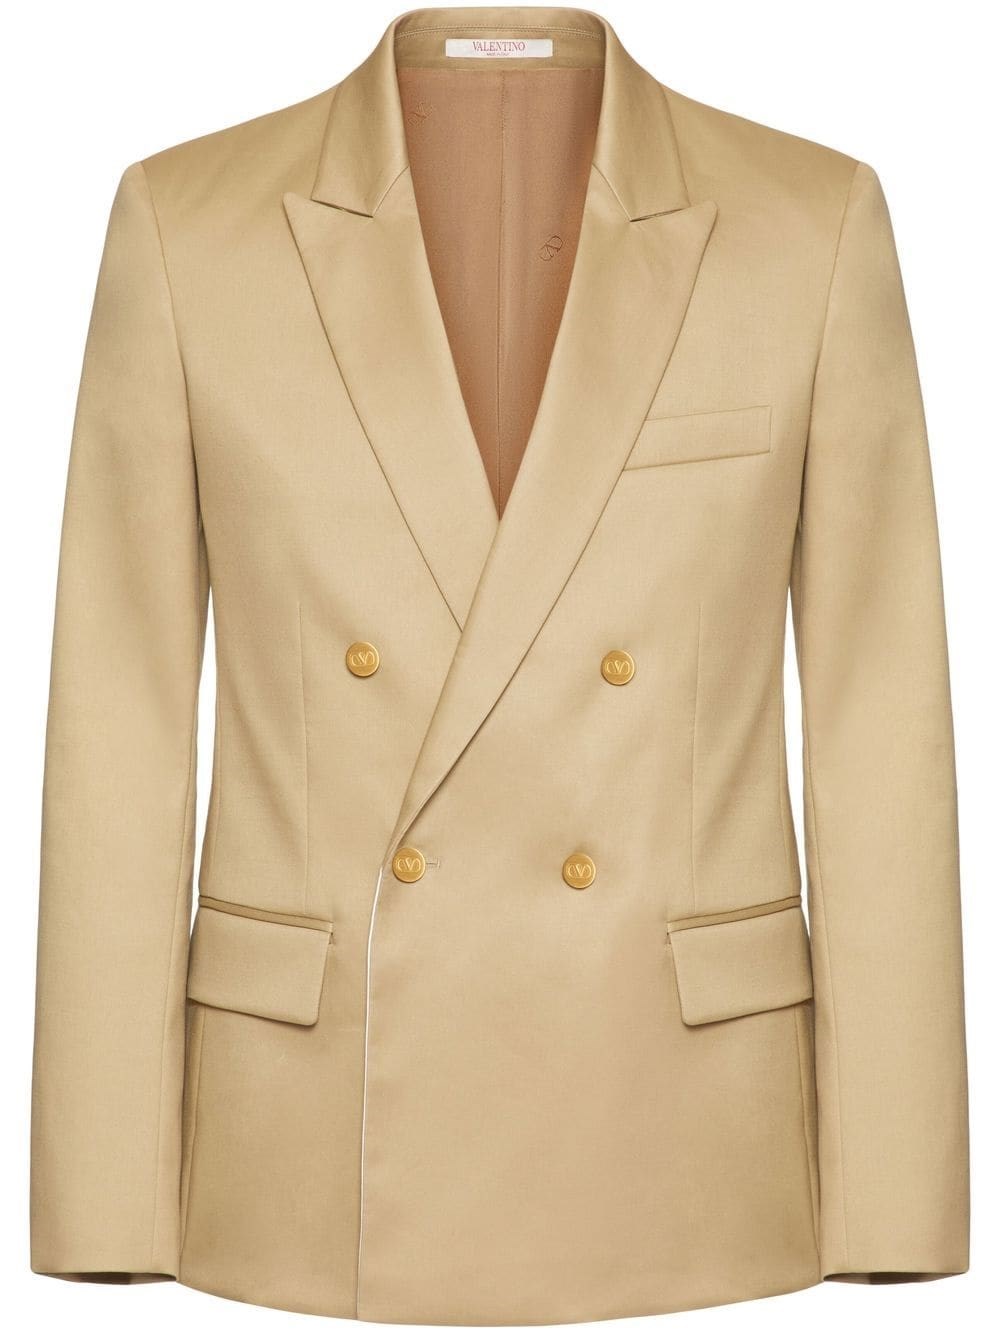 VALENTINO DOUBLE-BREASTED JACKET